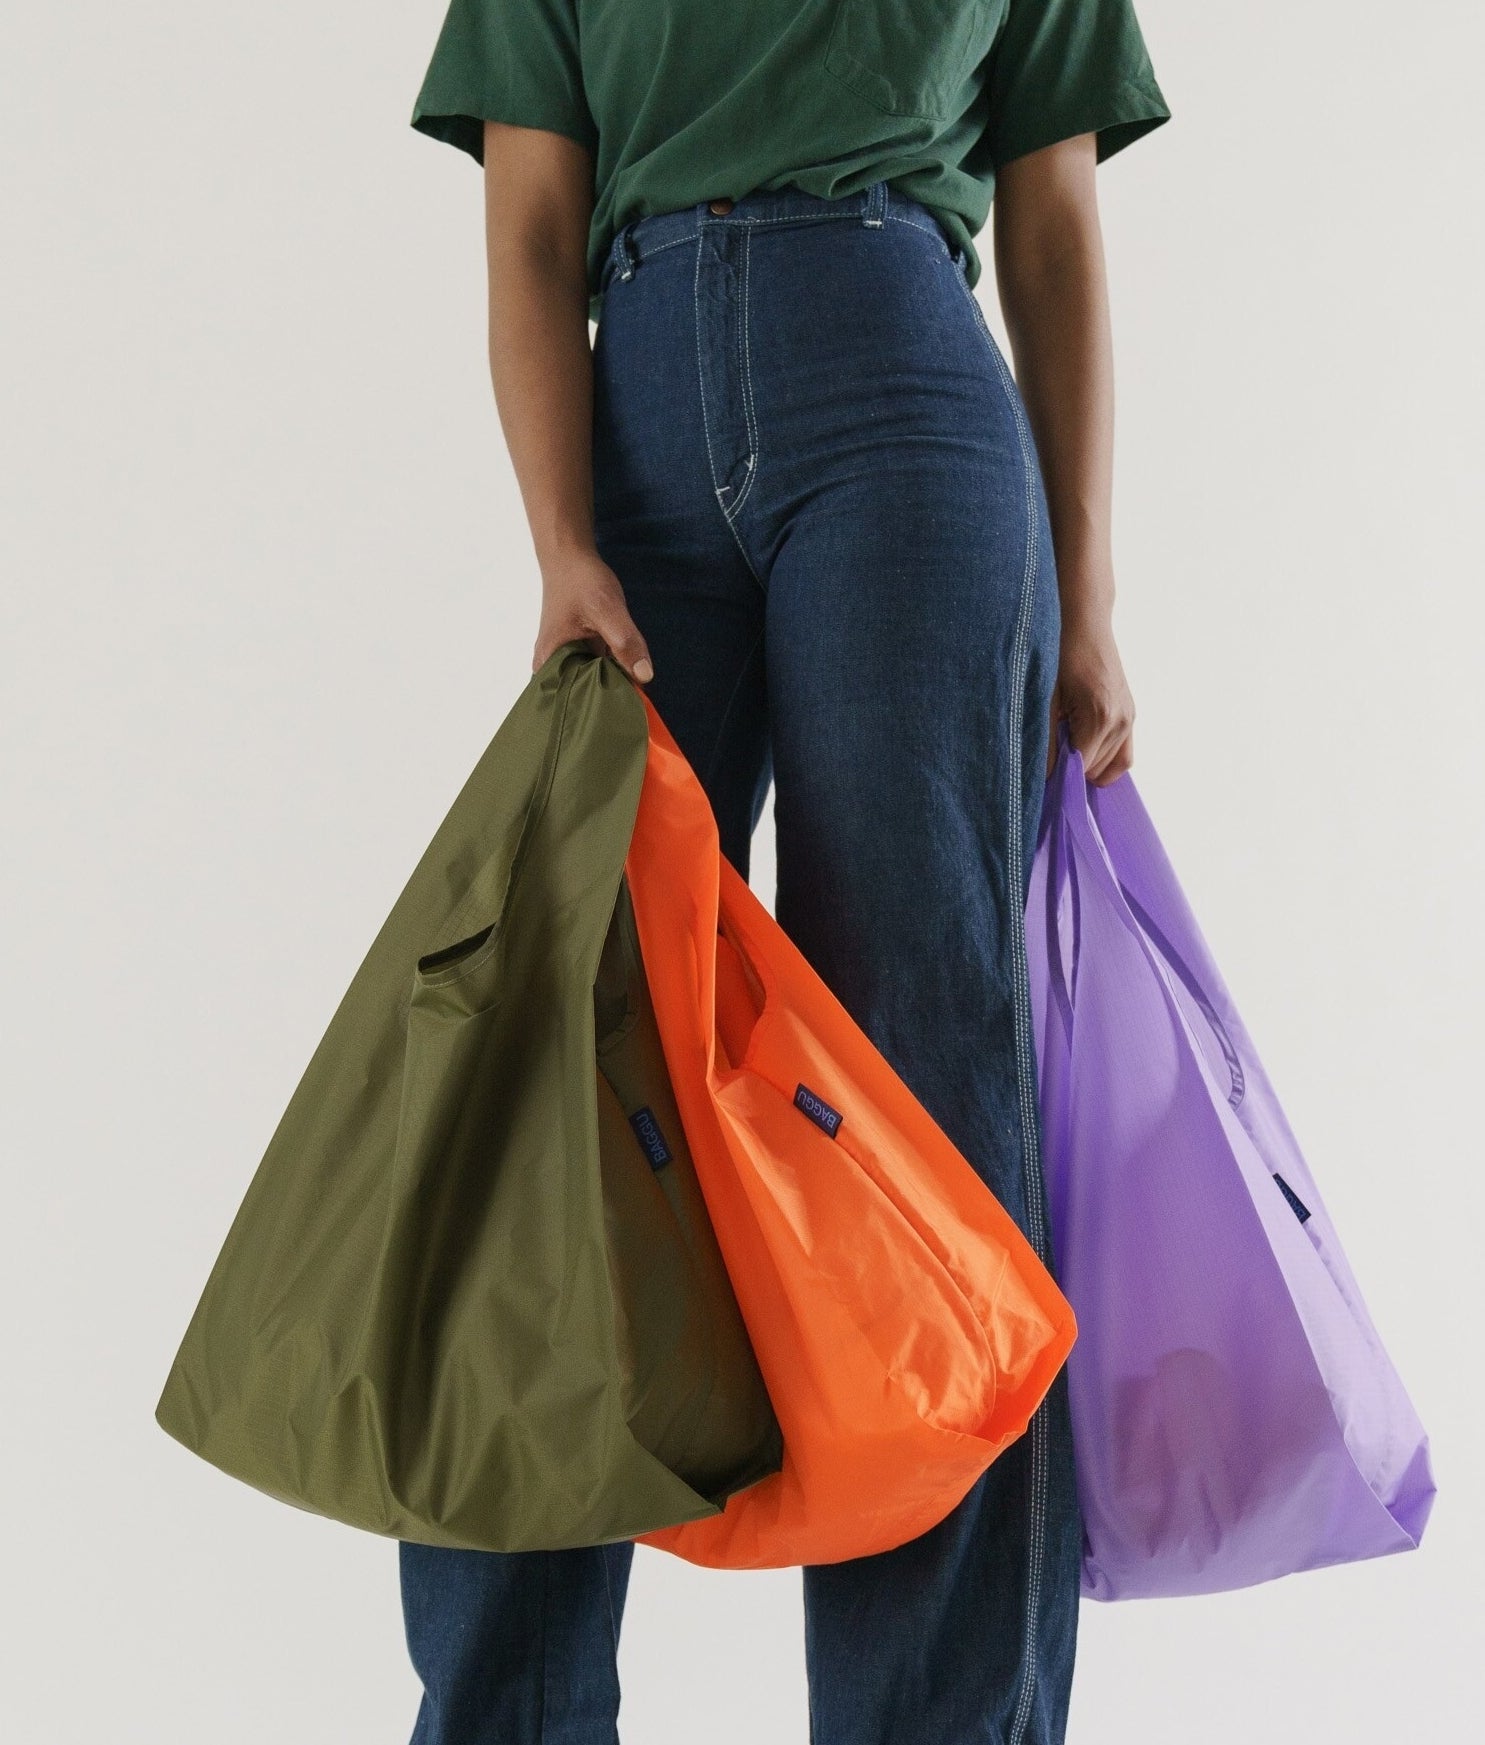 A person carrying three large bags